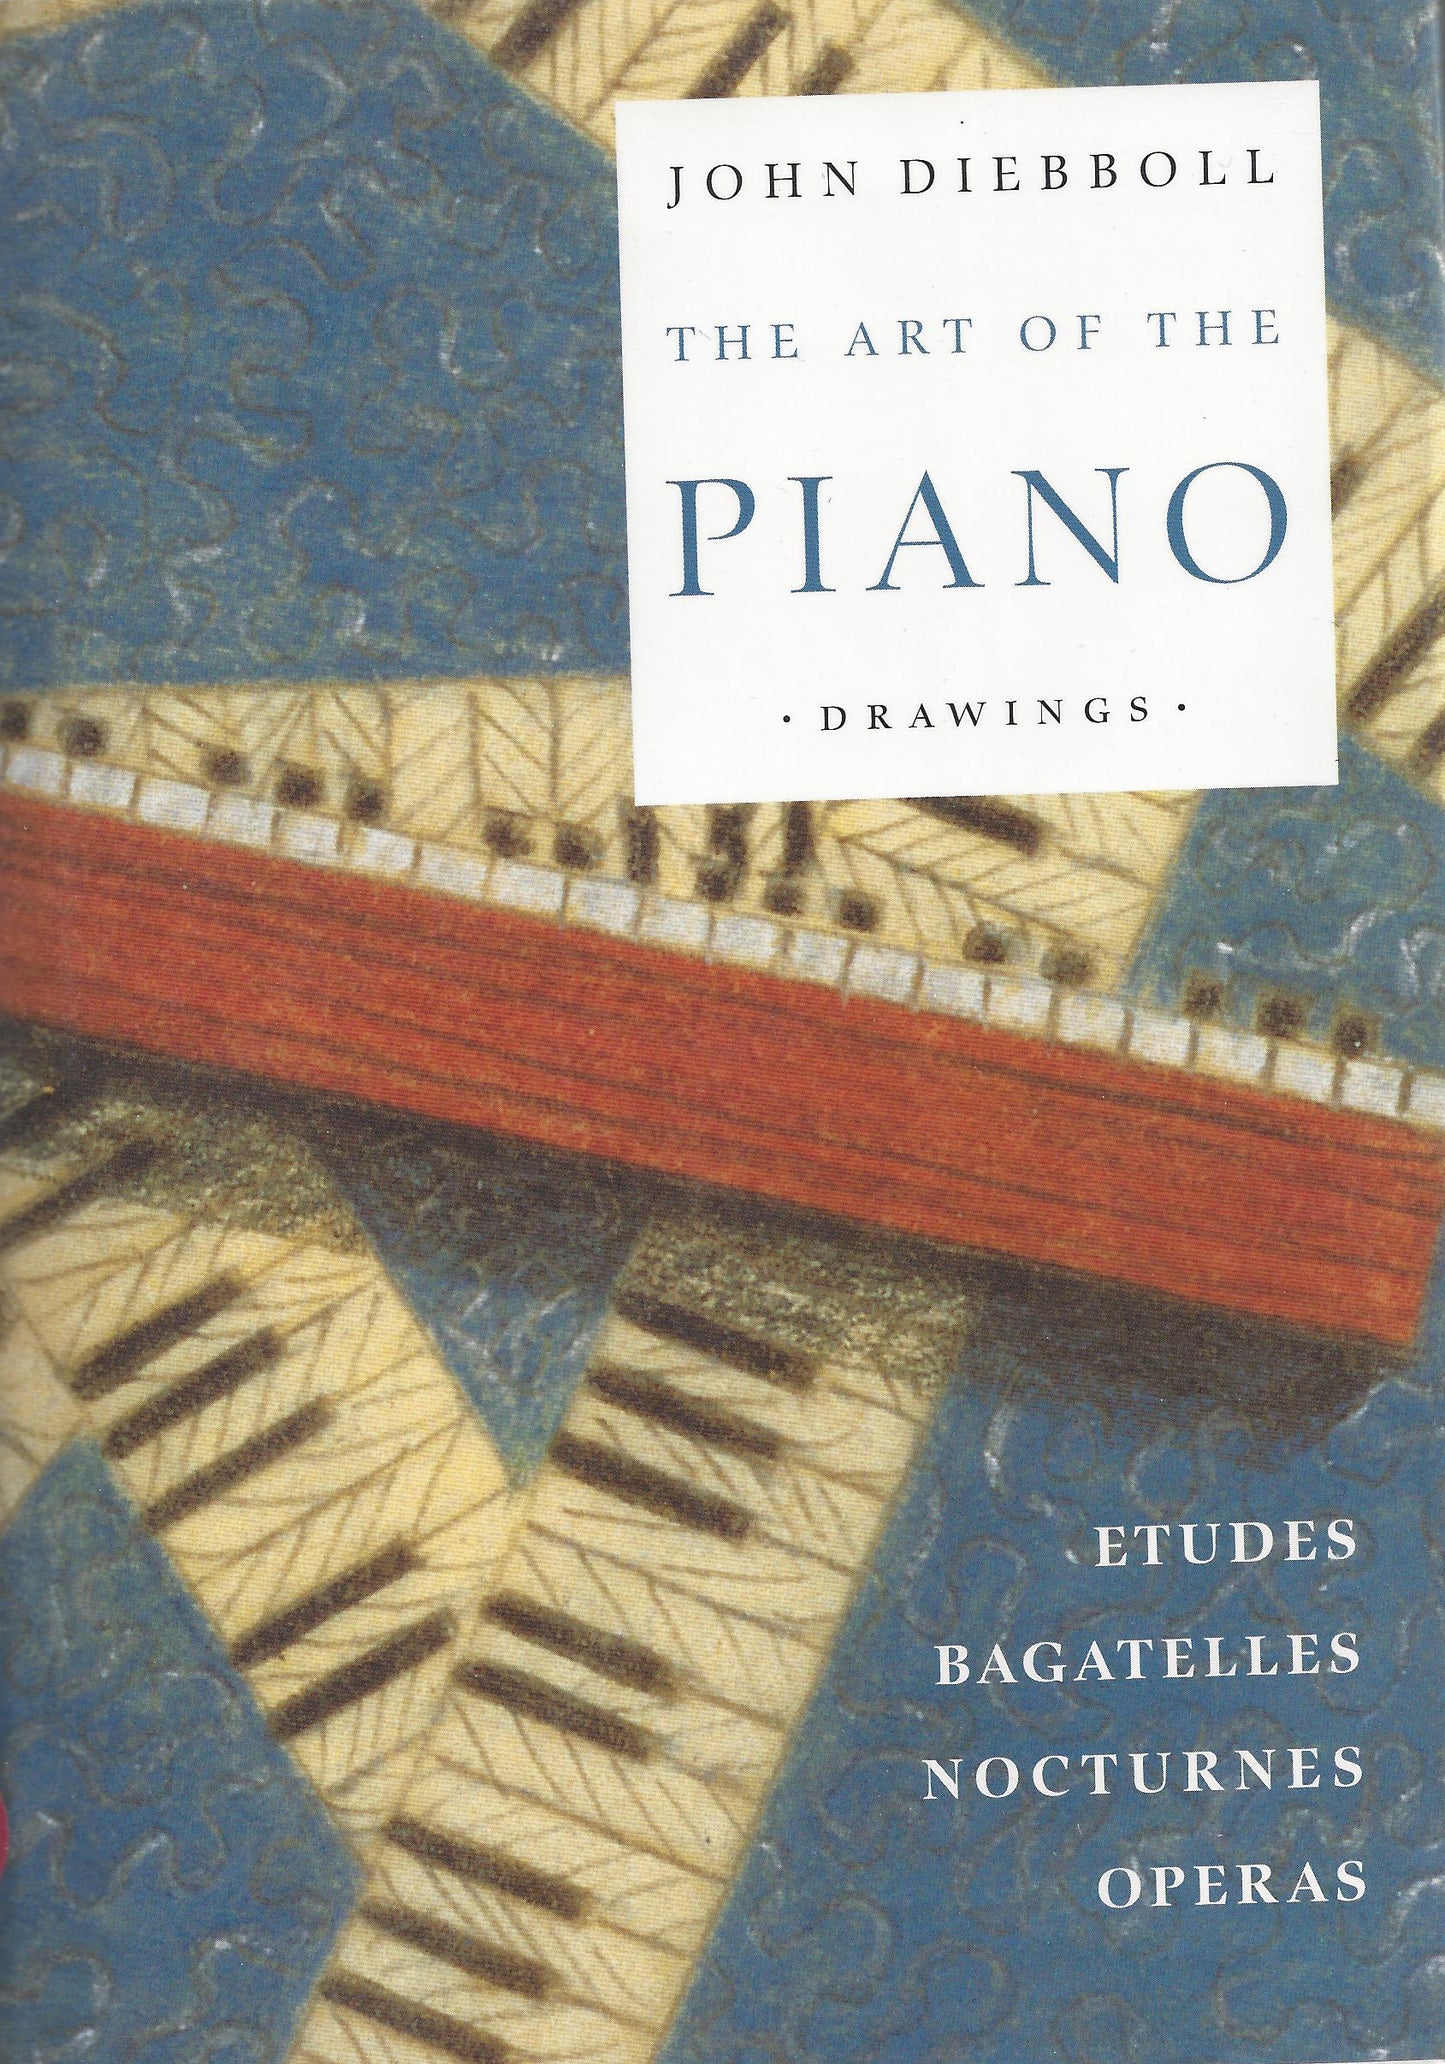 The Art of the Piano - SAVE 50%!